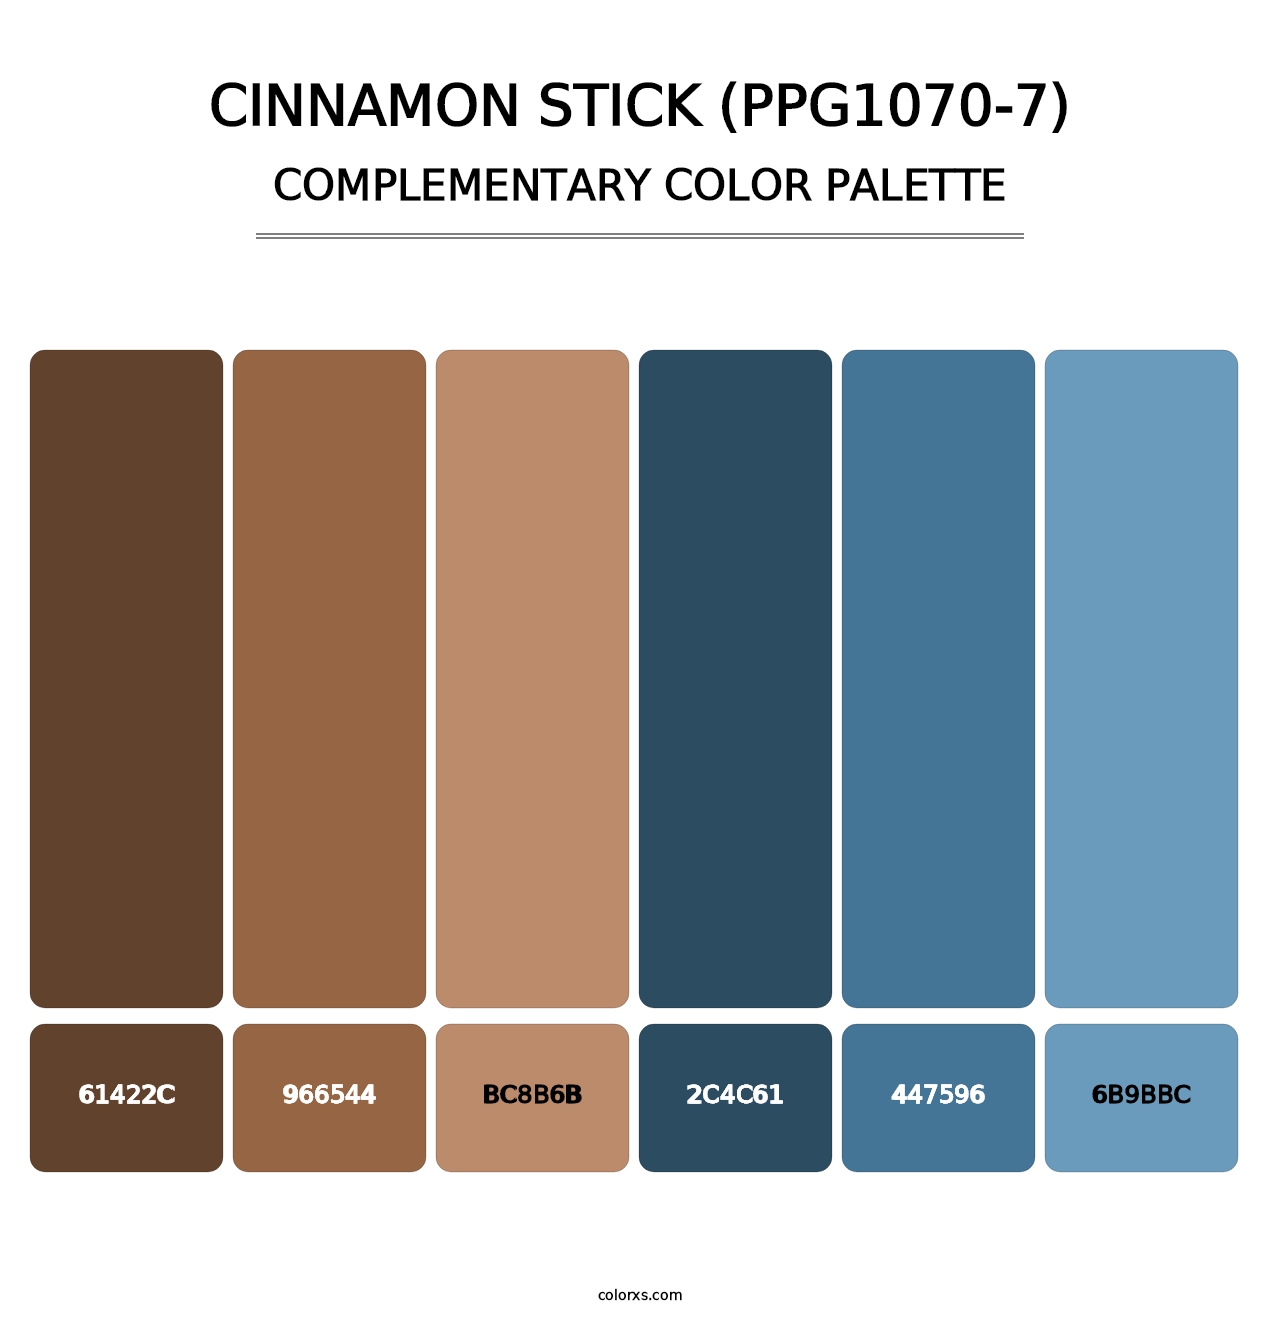 Cinnamon Stick (PPG1070-7) - Complementary Color Palette